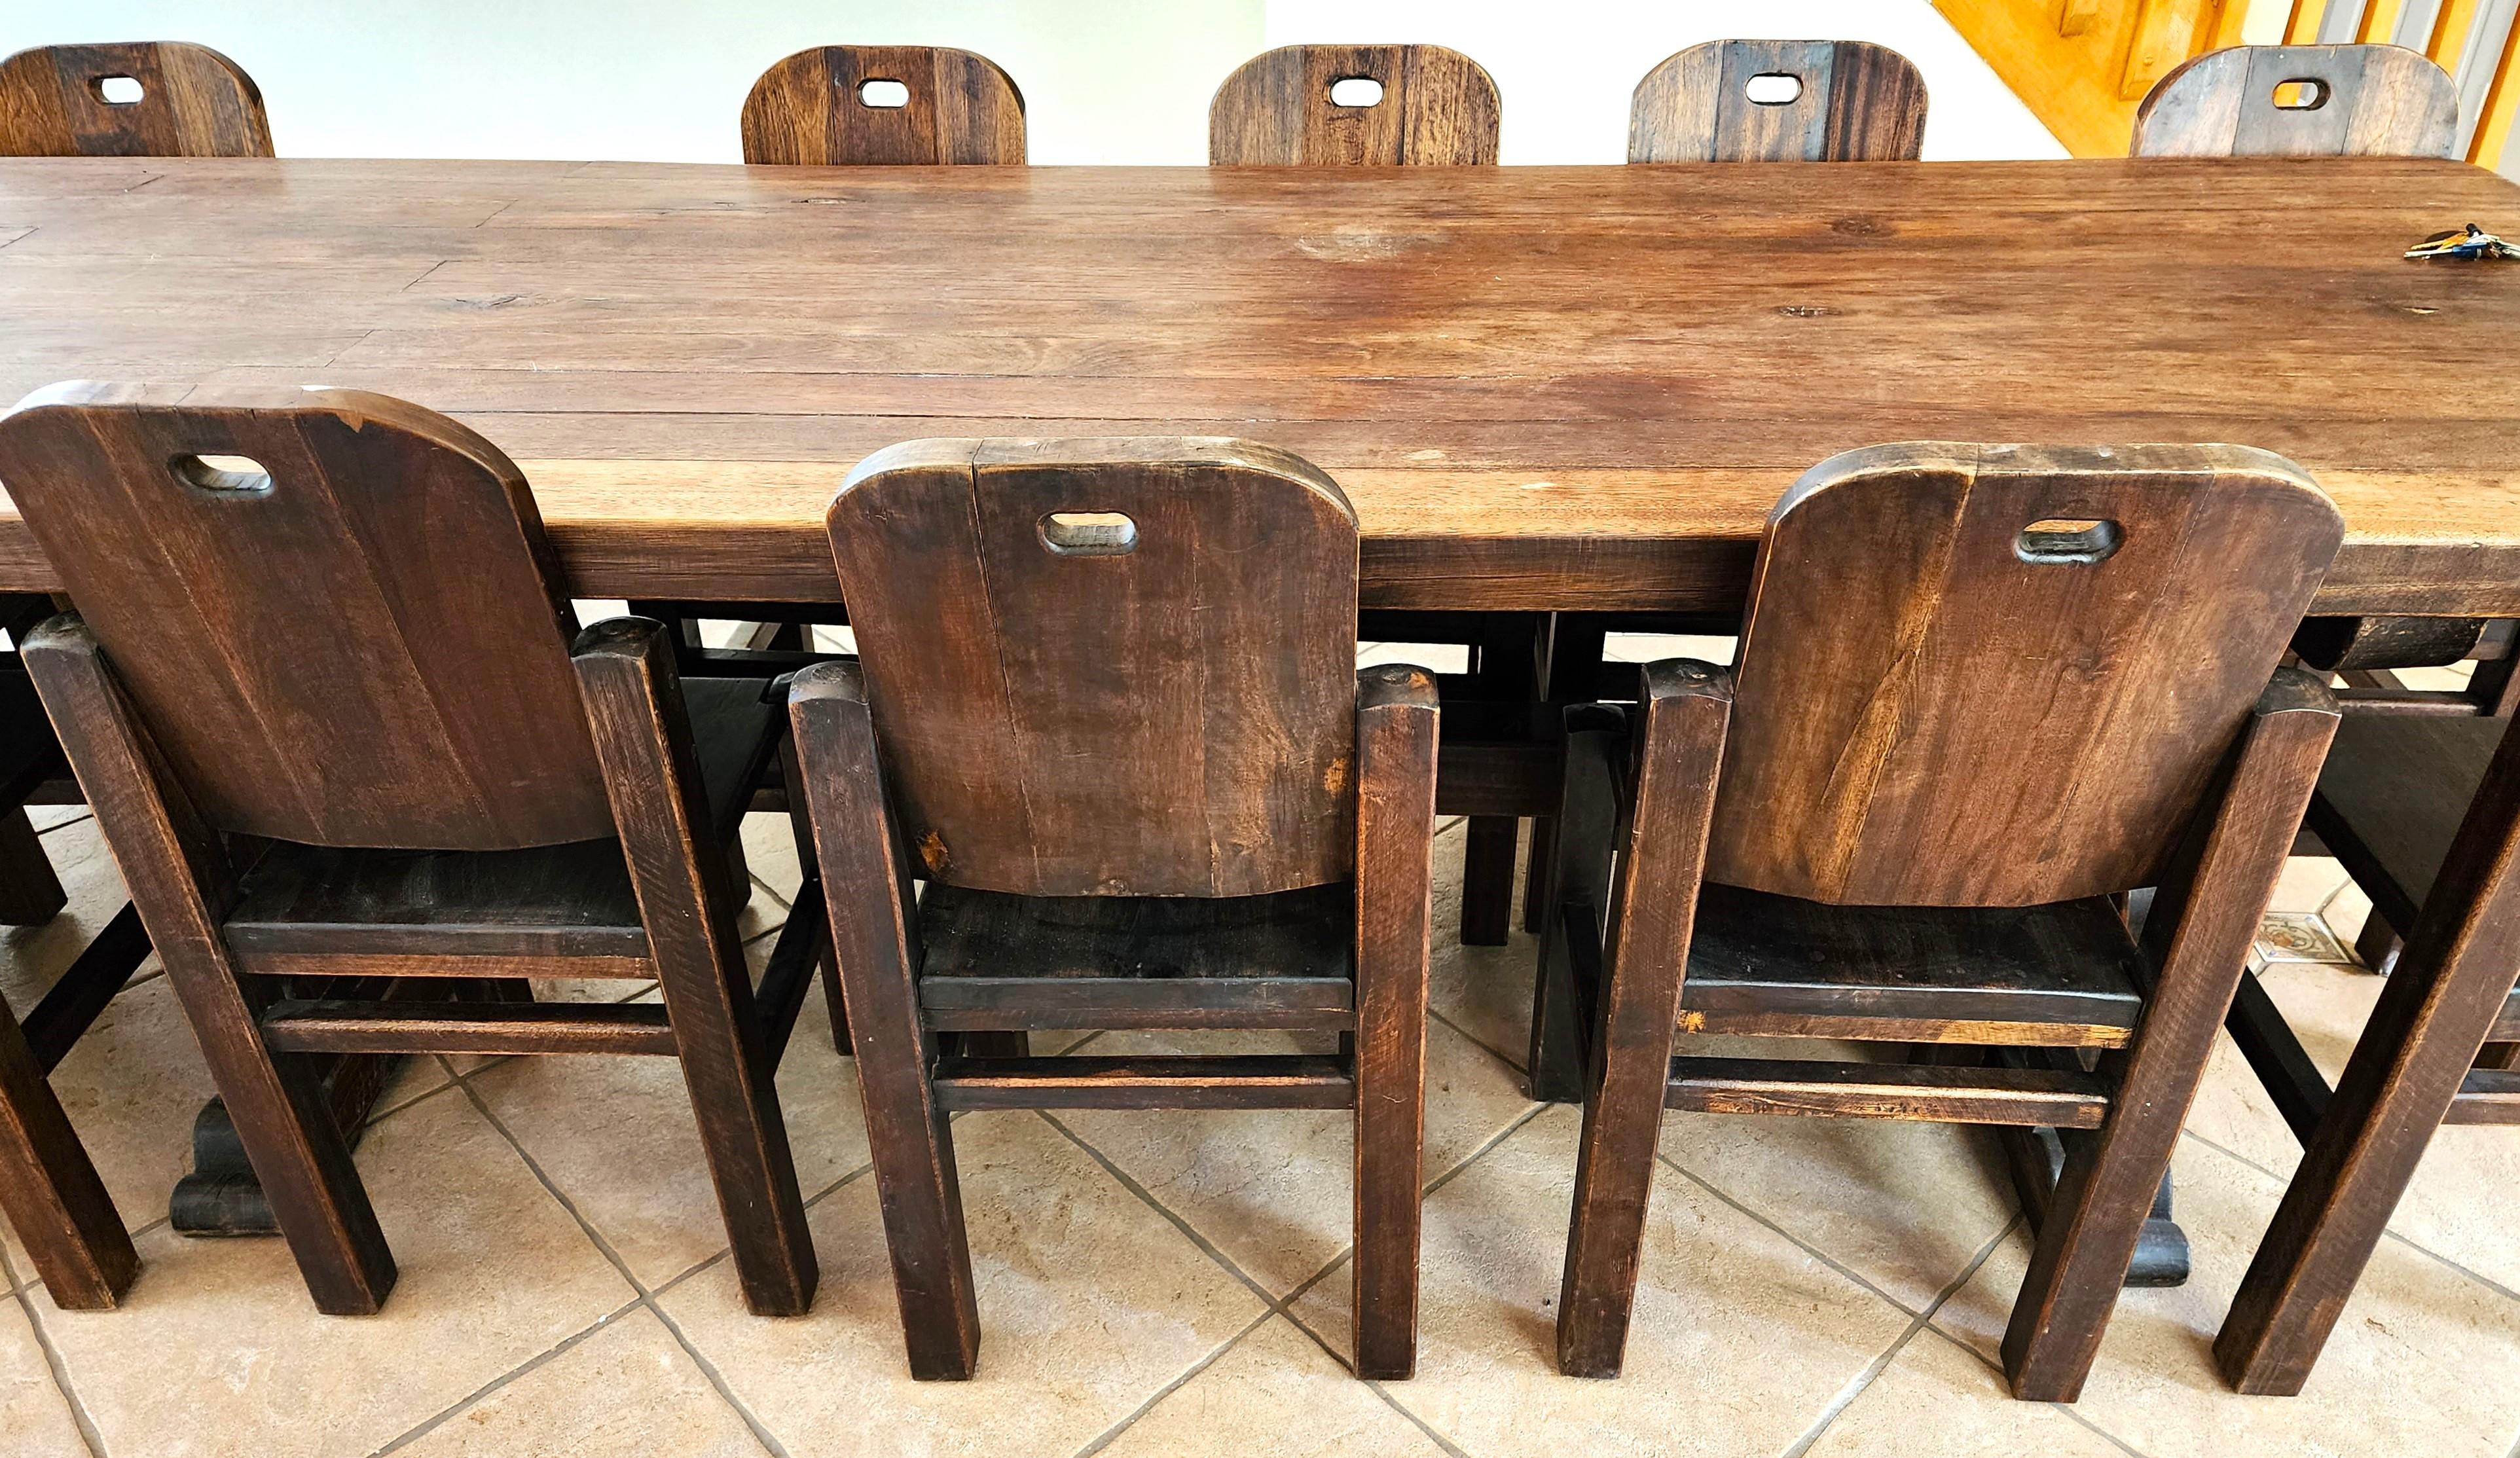 For full item description click on continue reading at the bottom of this page. 

Offering One Of Our Recent Palm Beach Estate Fine Furniture Acquisitions Of A
16-foot Antique 1800s Oak Refractory Dining Table with 16 Matching Chairs
Extremely